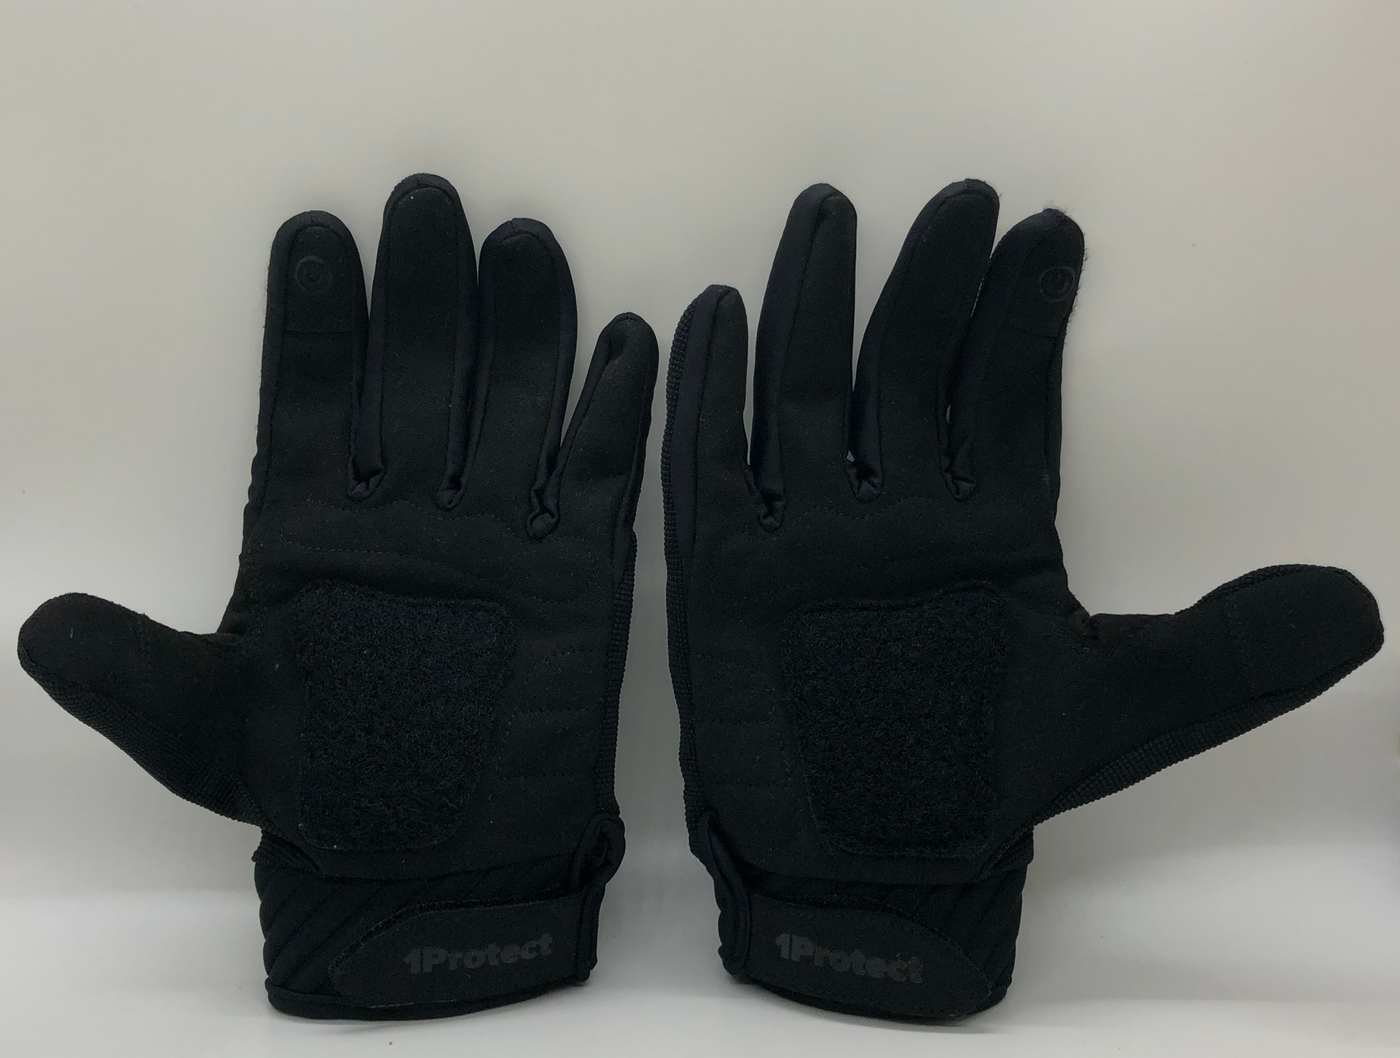 *Clearance* 1Protect Full Finger Gloves